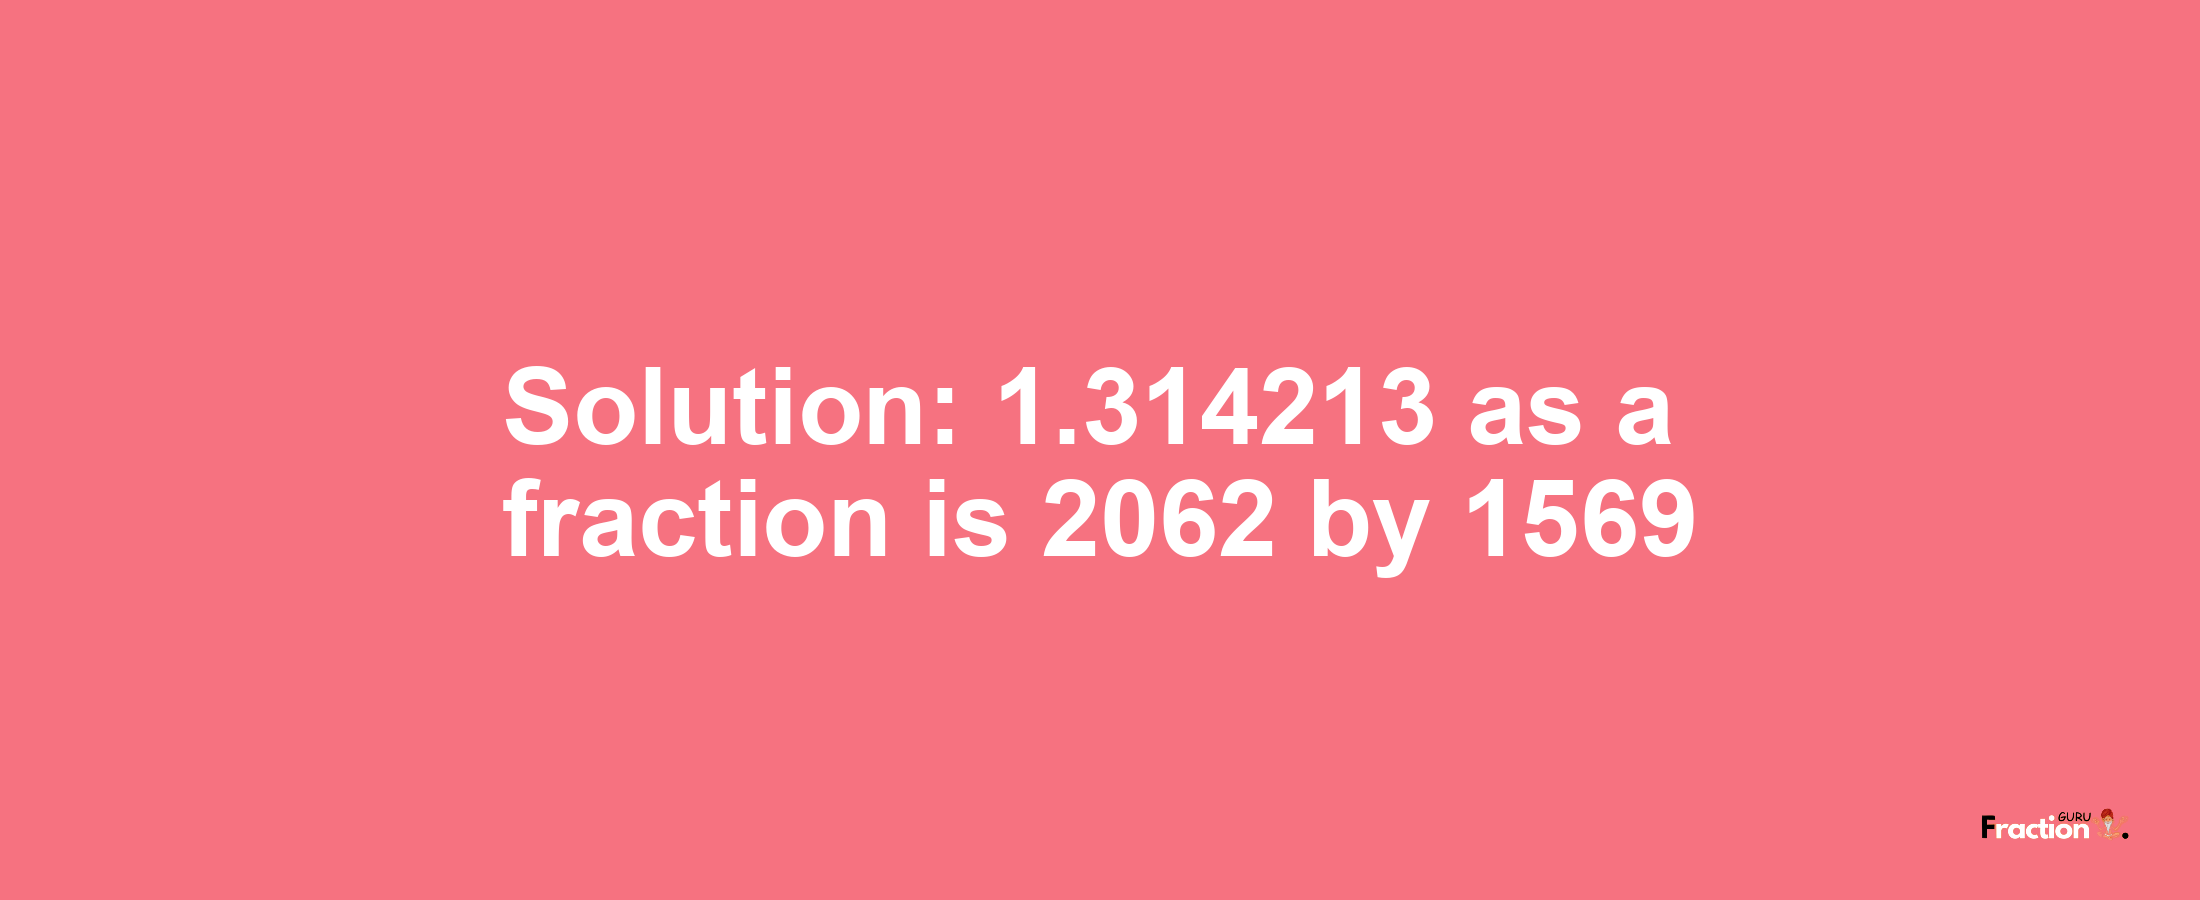 Solution:1.314213 as a fraction is 2062/1569